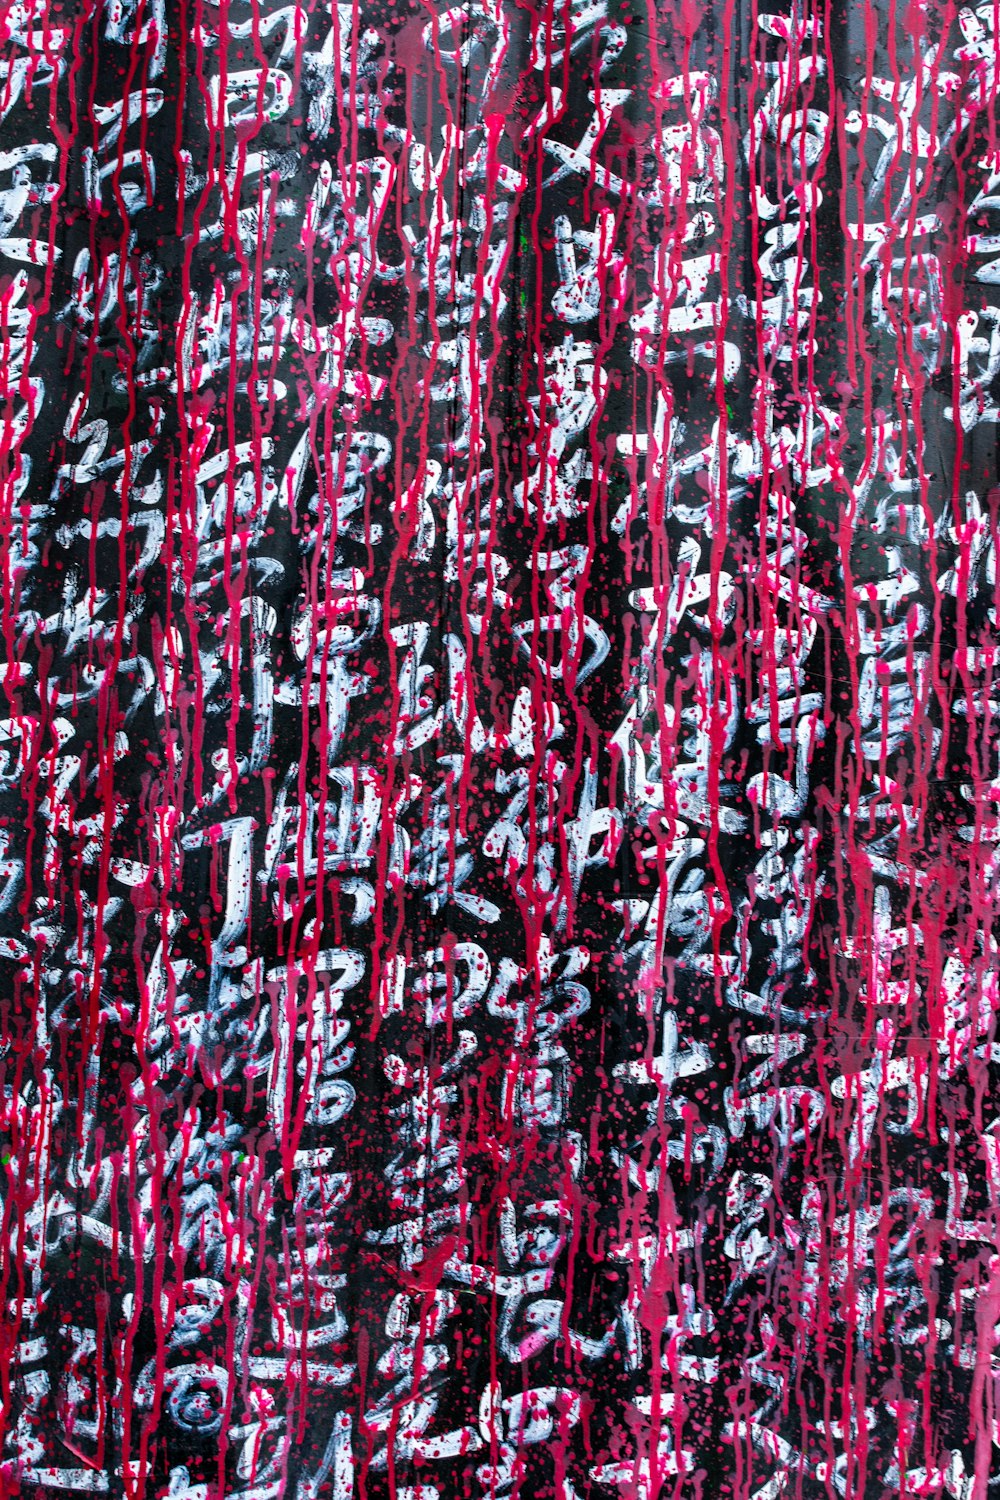 pink, black and white textile